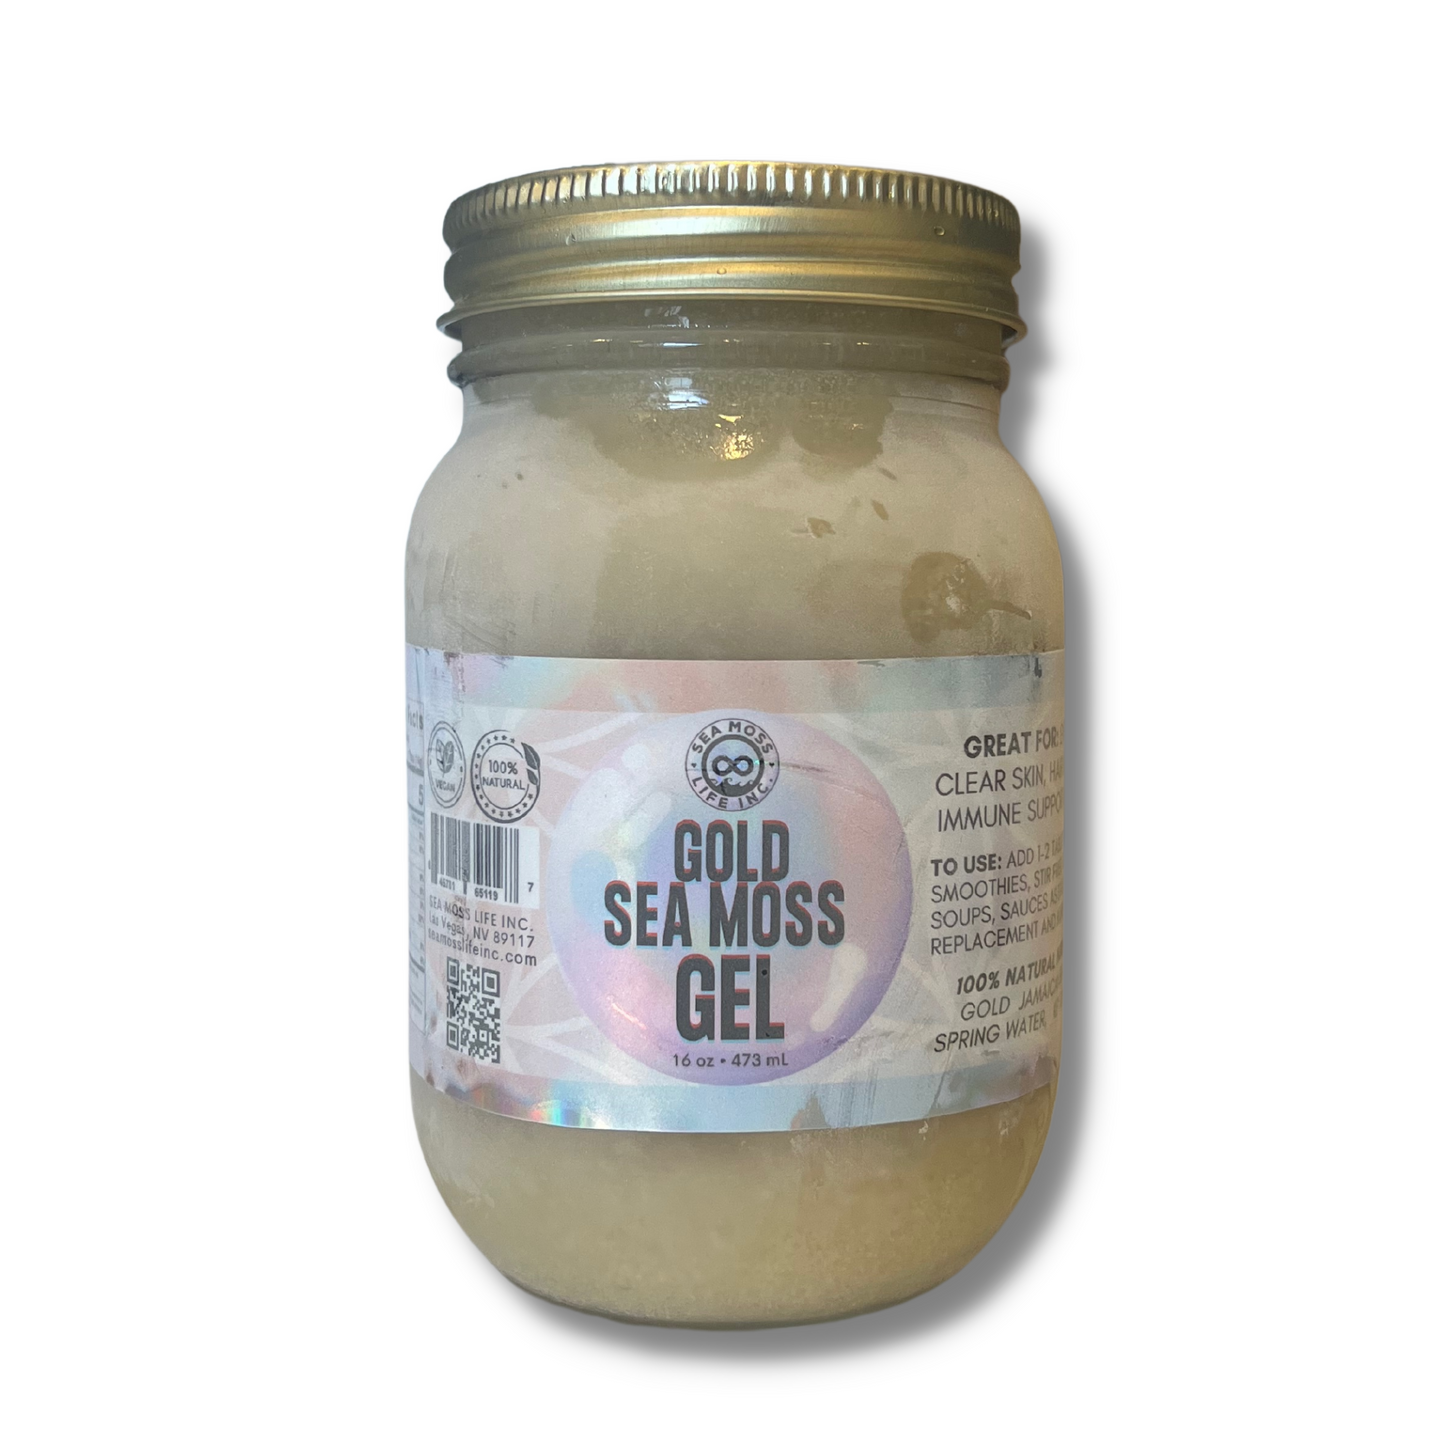 FRESH SEA MOSS GEL MADE TO ORDER: WILDCRAFTED | PREMIUM QUALITY | NATURAL SUPERFOOD | 16 FL OZ